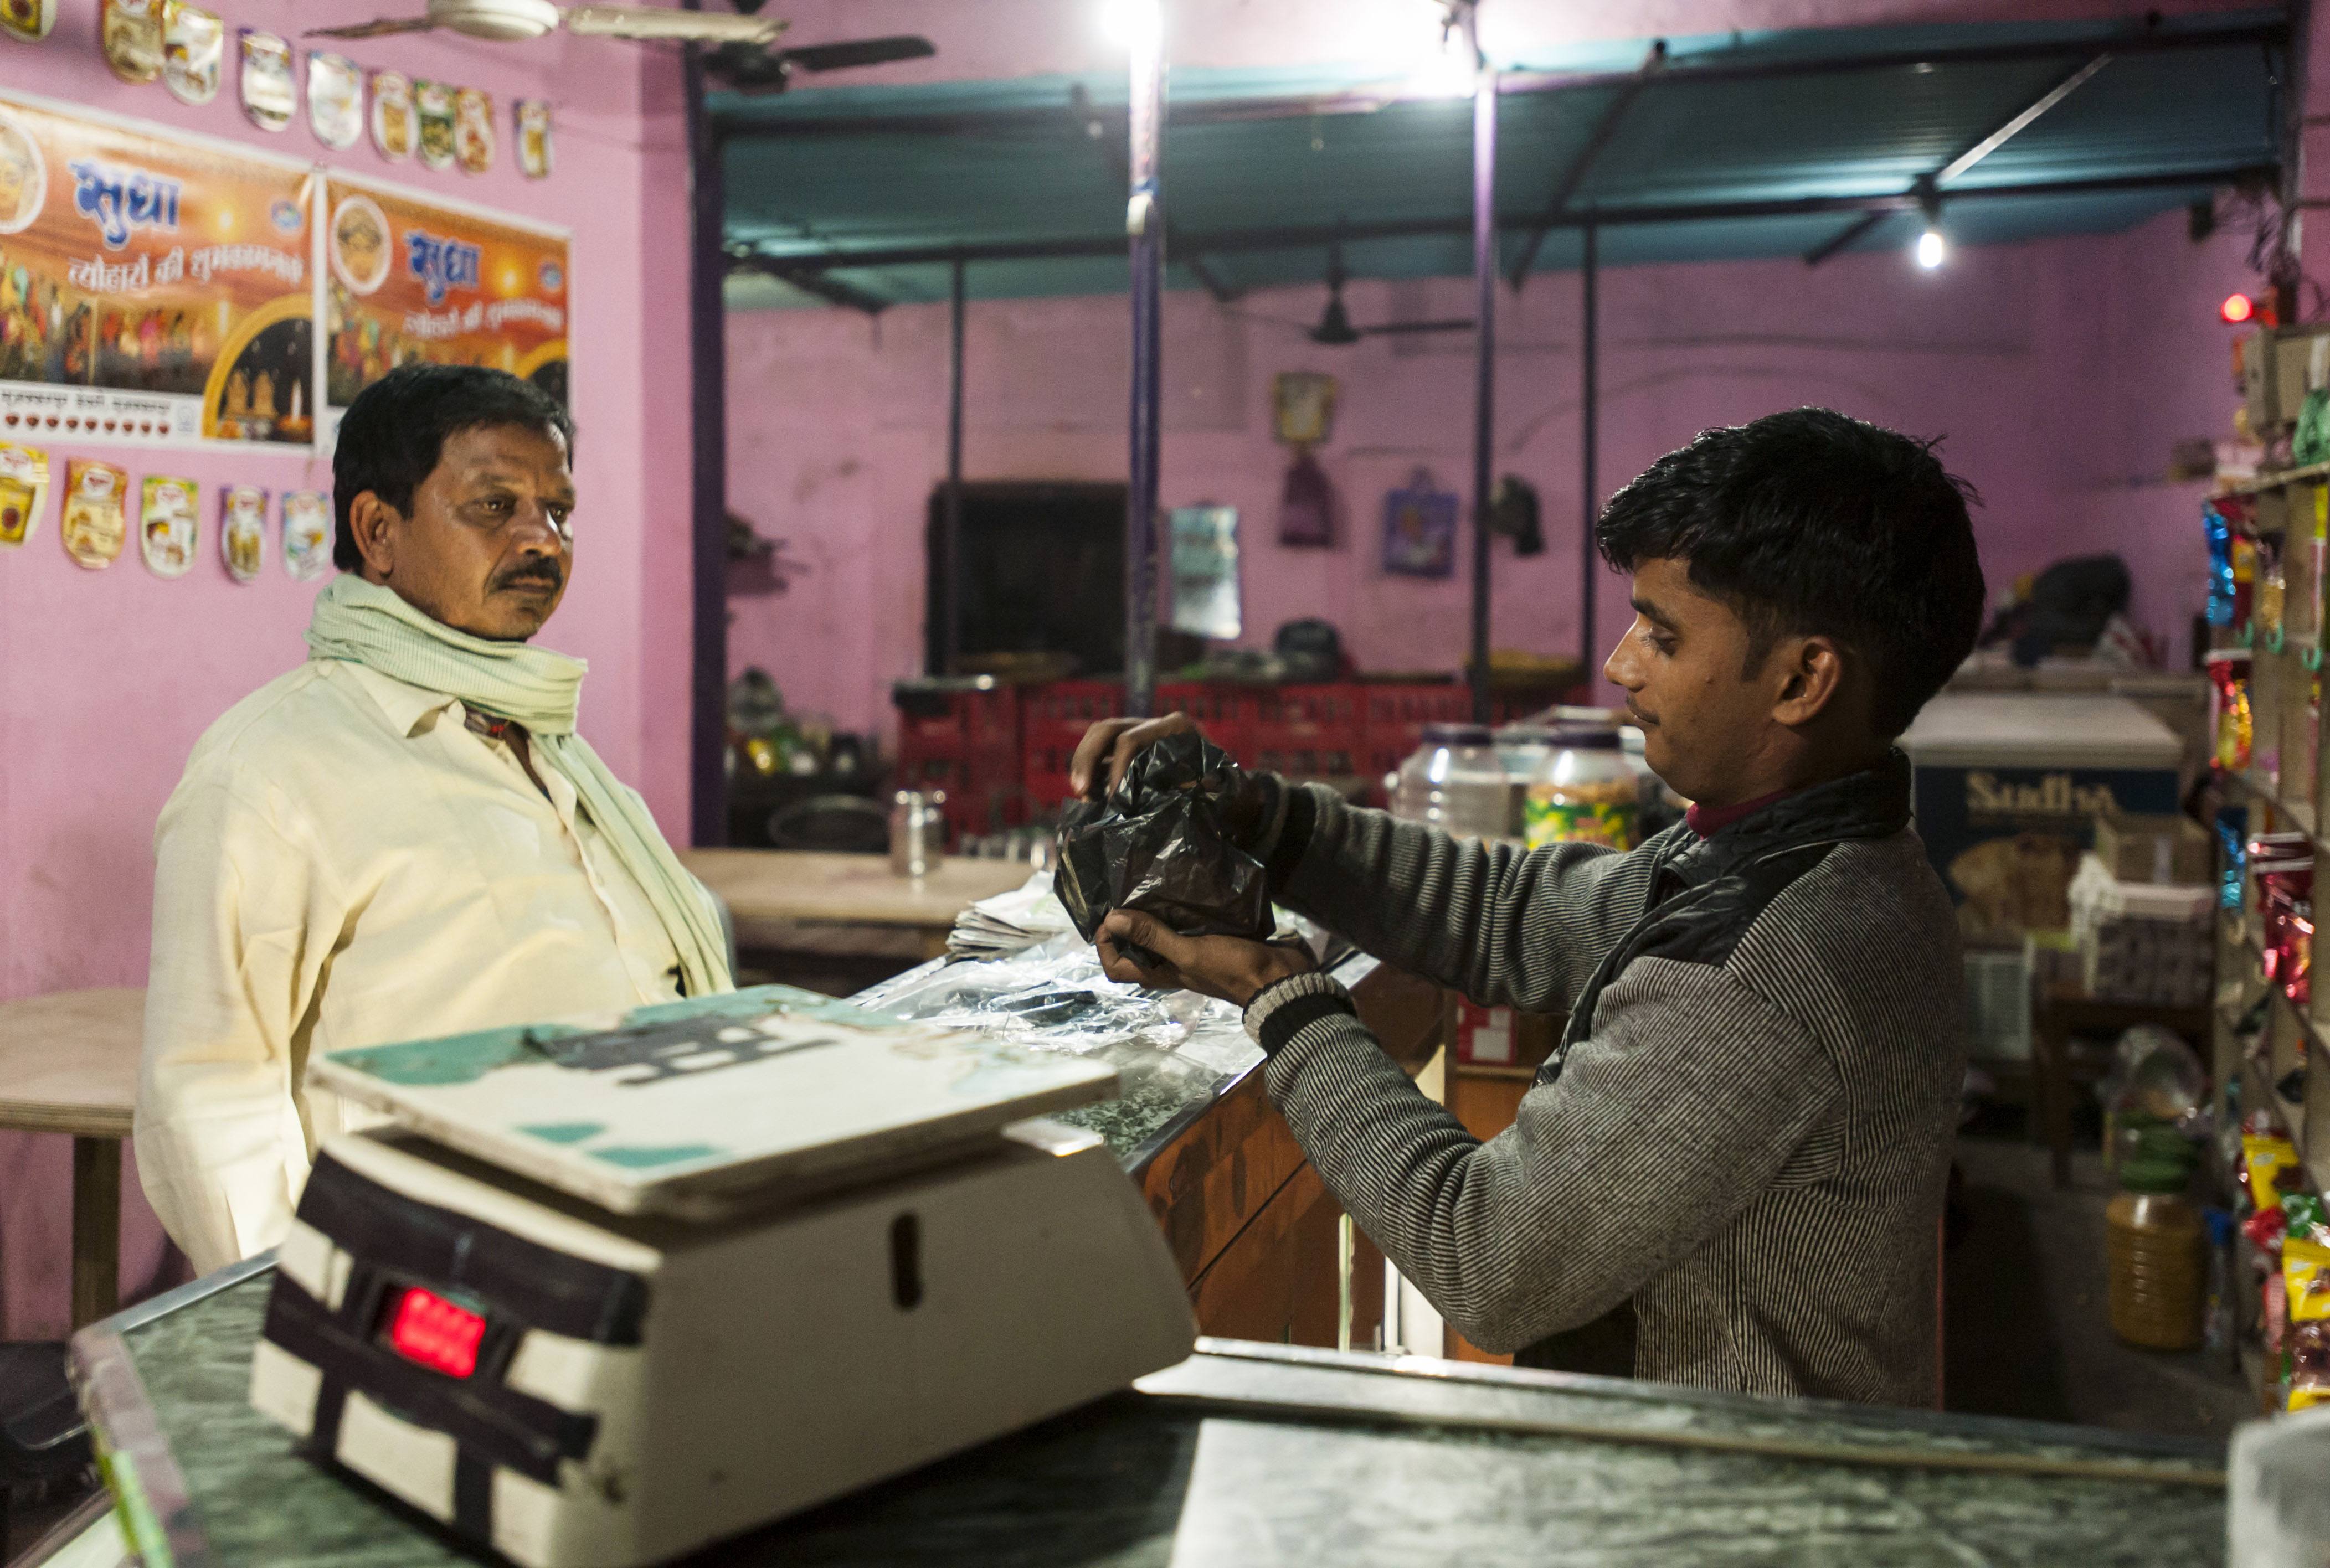 Image of a shop in India two men